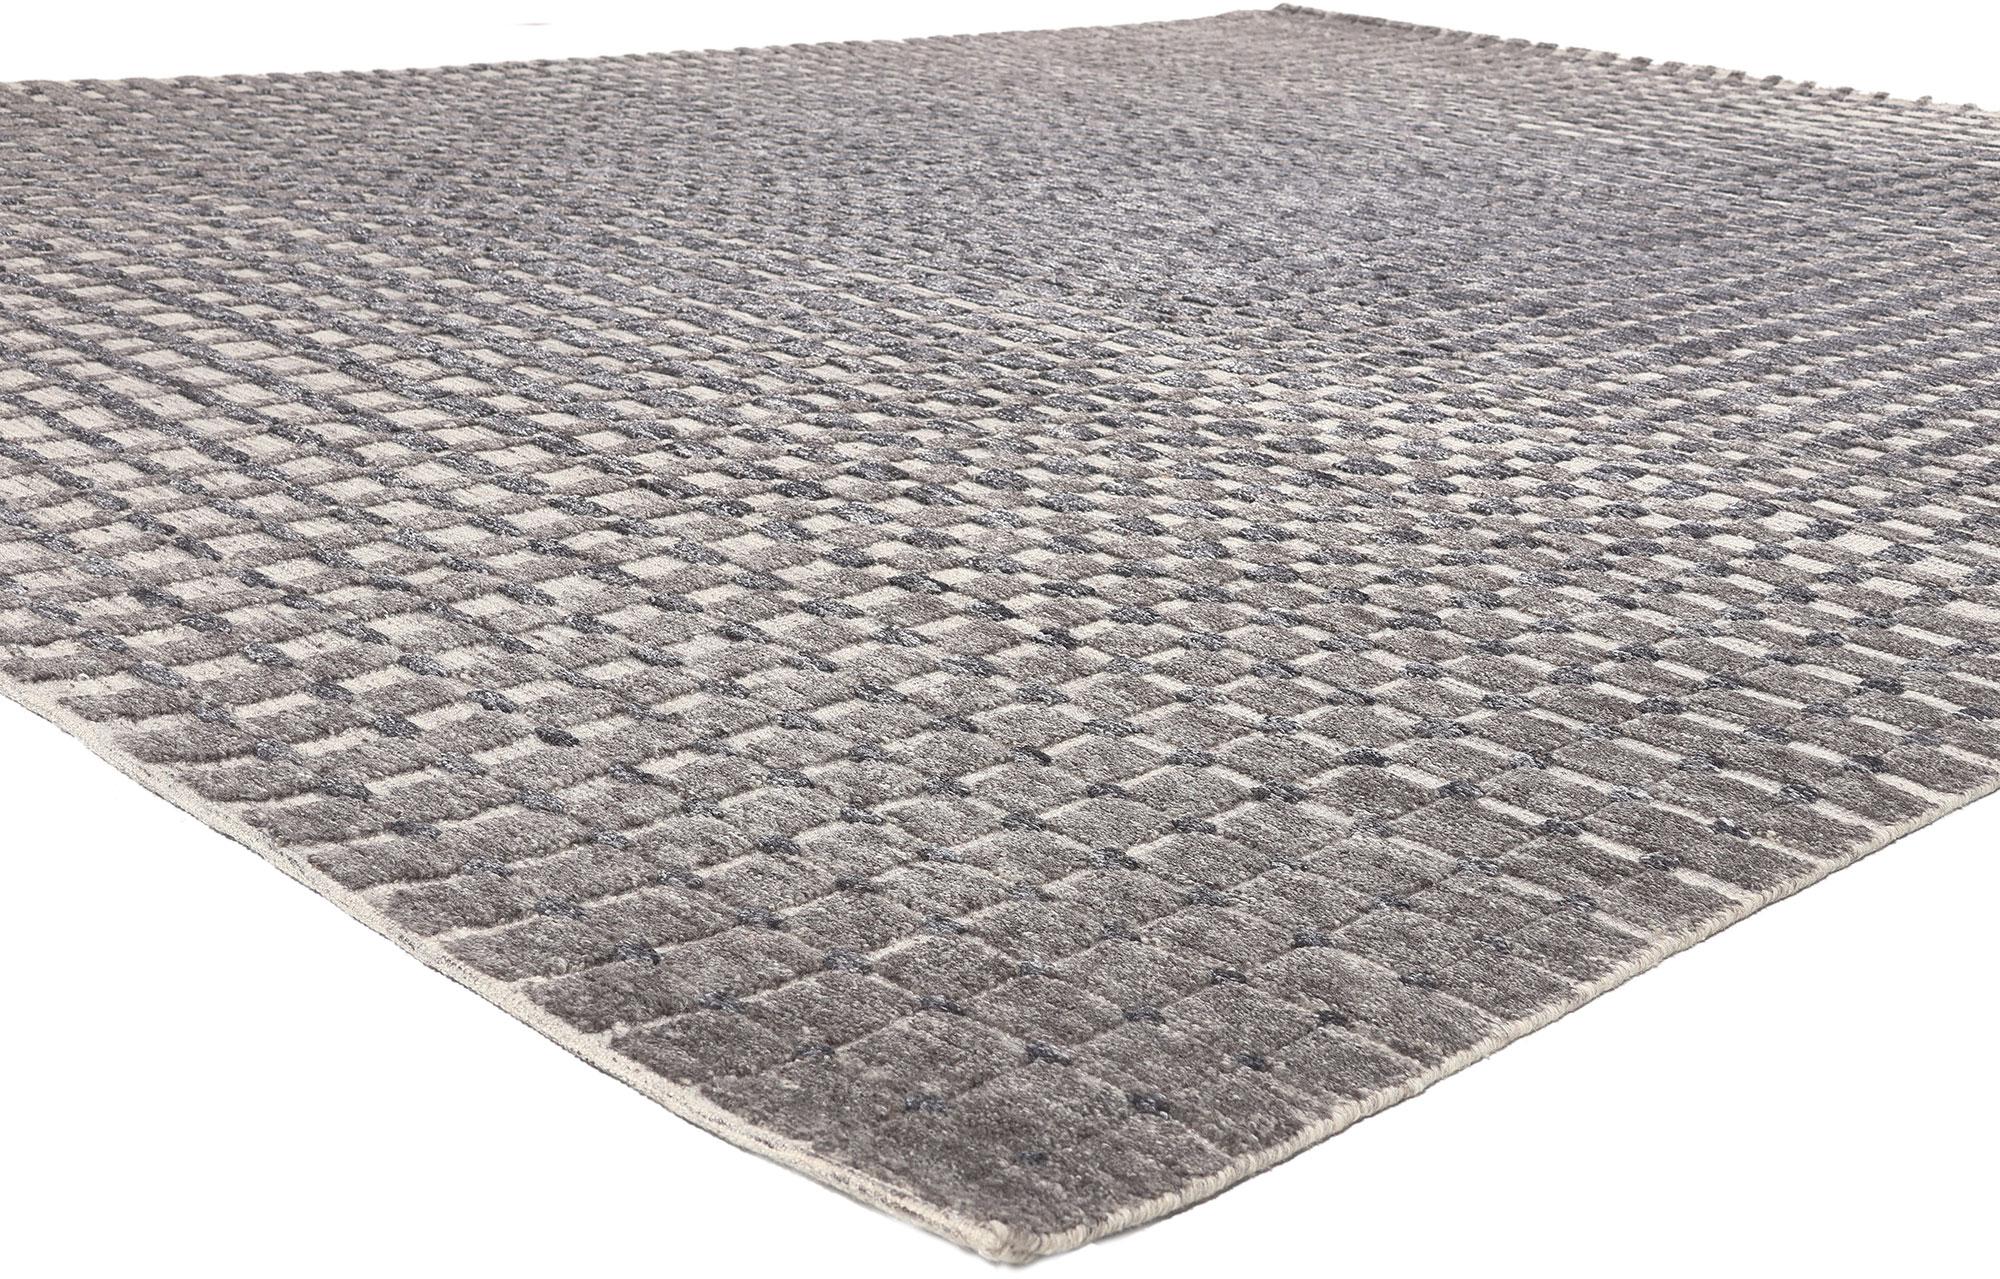 30979 Modern Gray Geometric High-Low Rug, 09'02 x 11'09.
Emanating simplicity with incredible detail and texture, this area rug provides a feeling of cozy contentment without the clutter. The eye-catching checked design and earthy colorway woven